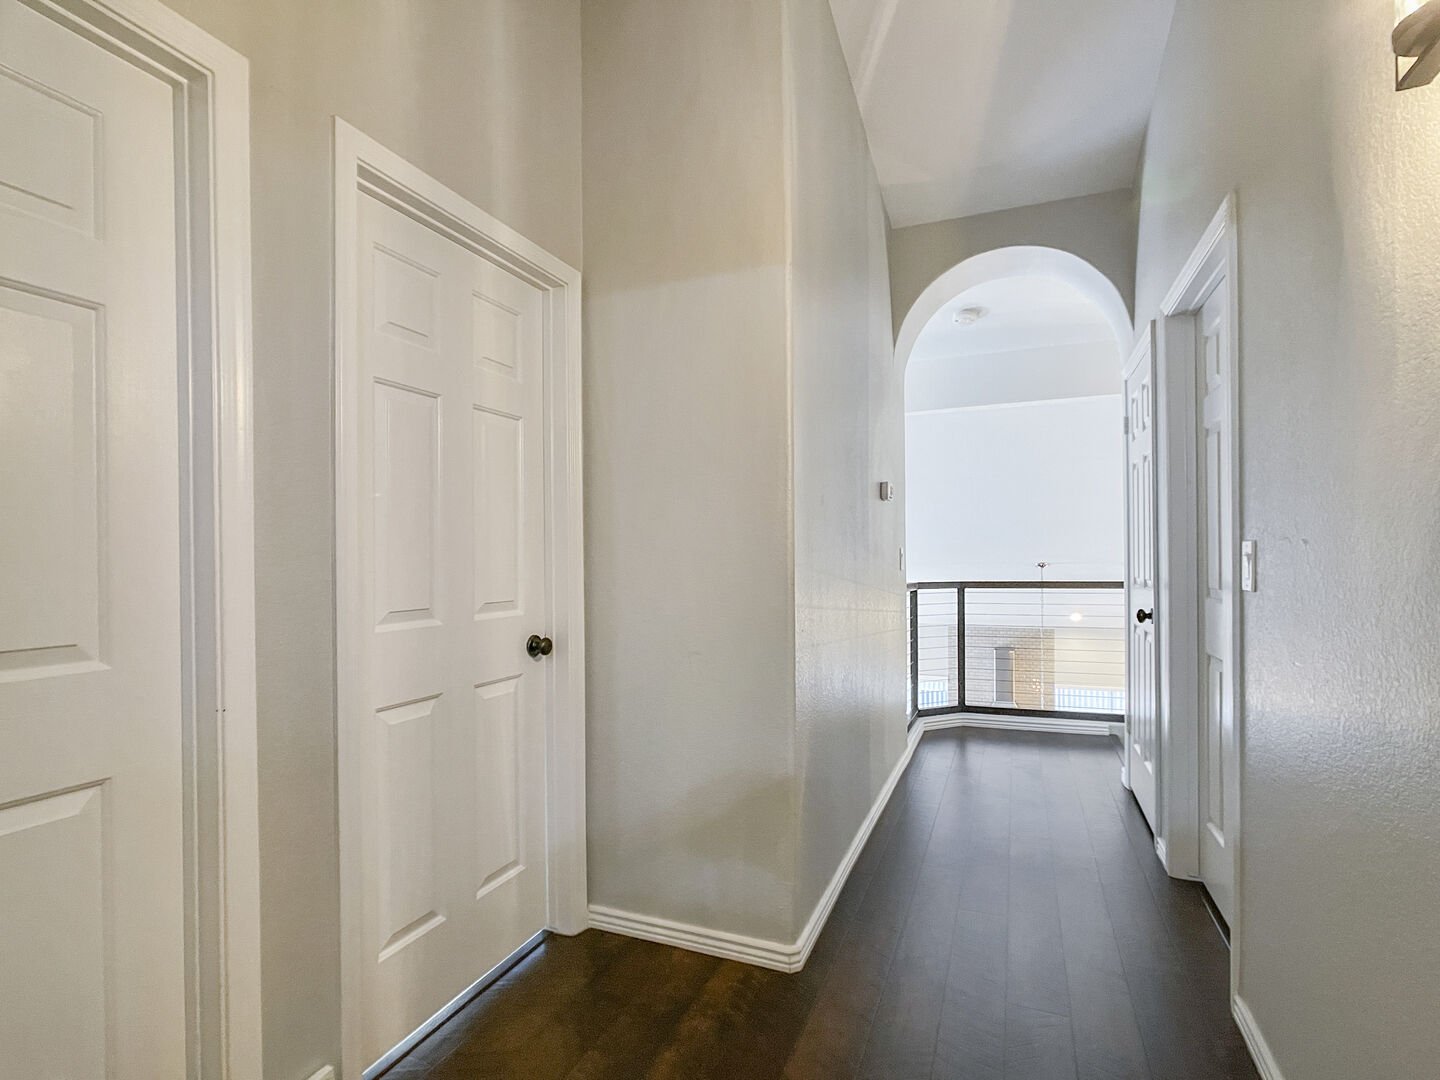 A bathroom, two bedrooms and the study loft are located off of this hallway!